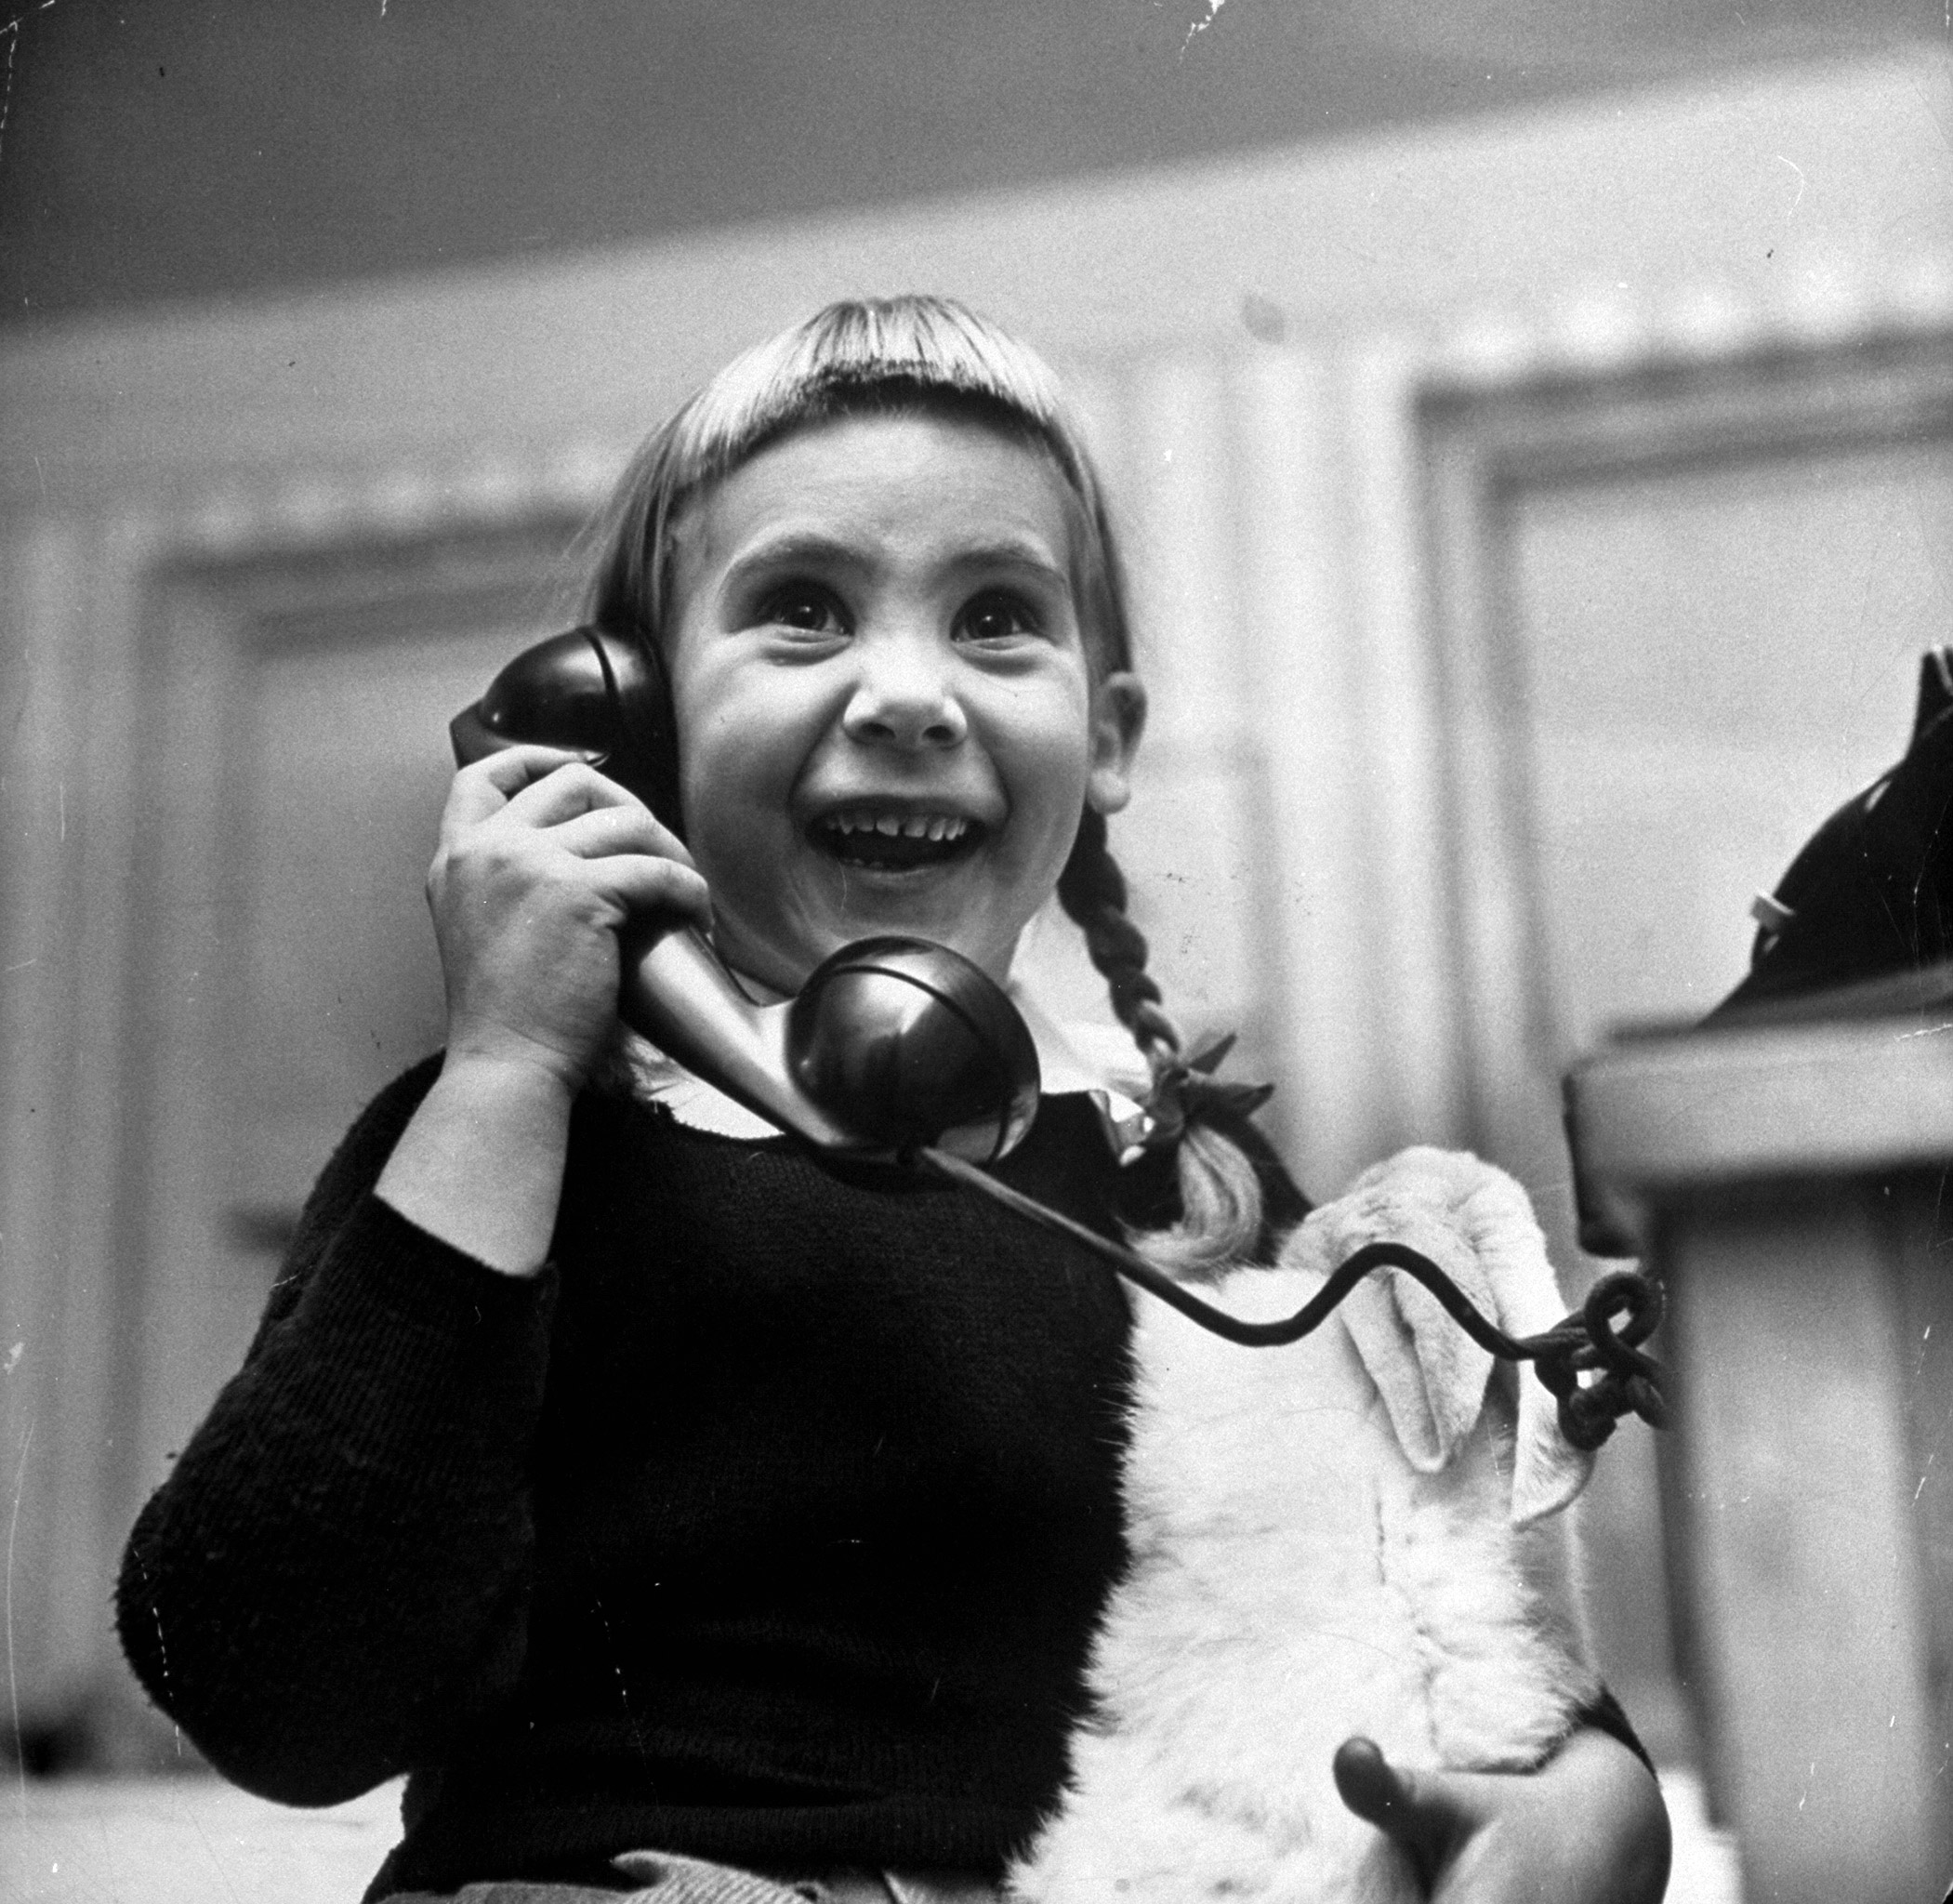 A young girl talking to Santa Claus on the telephone, 1947.